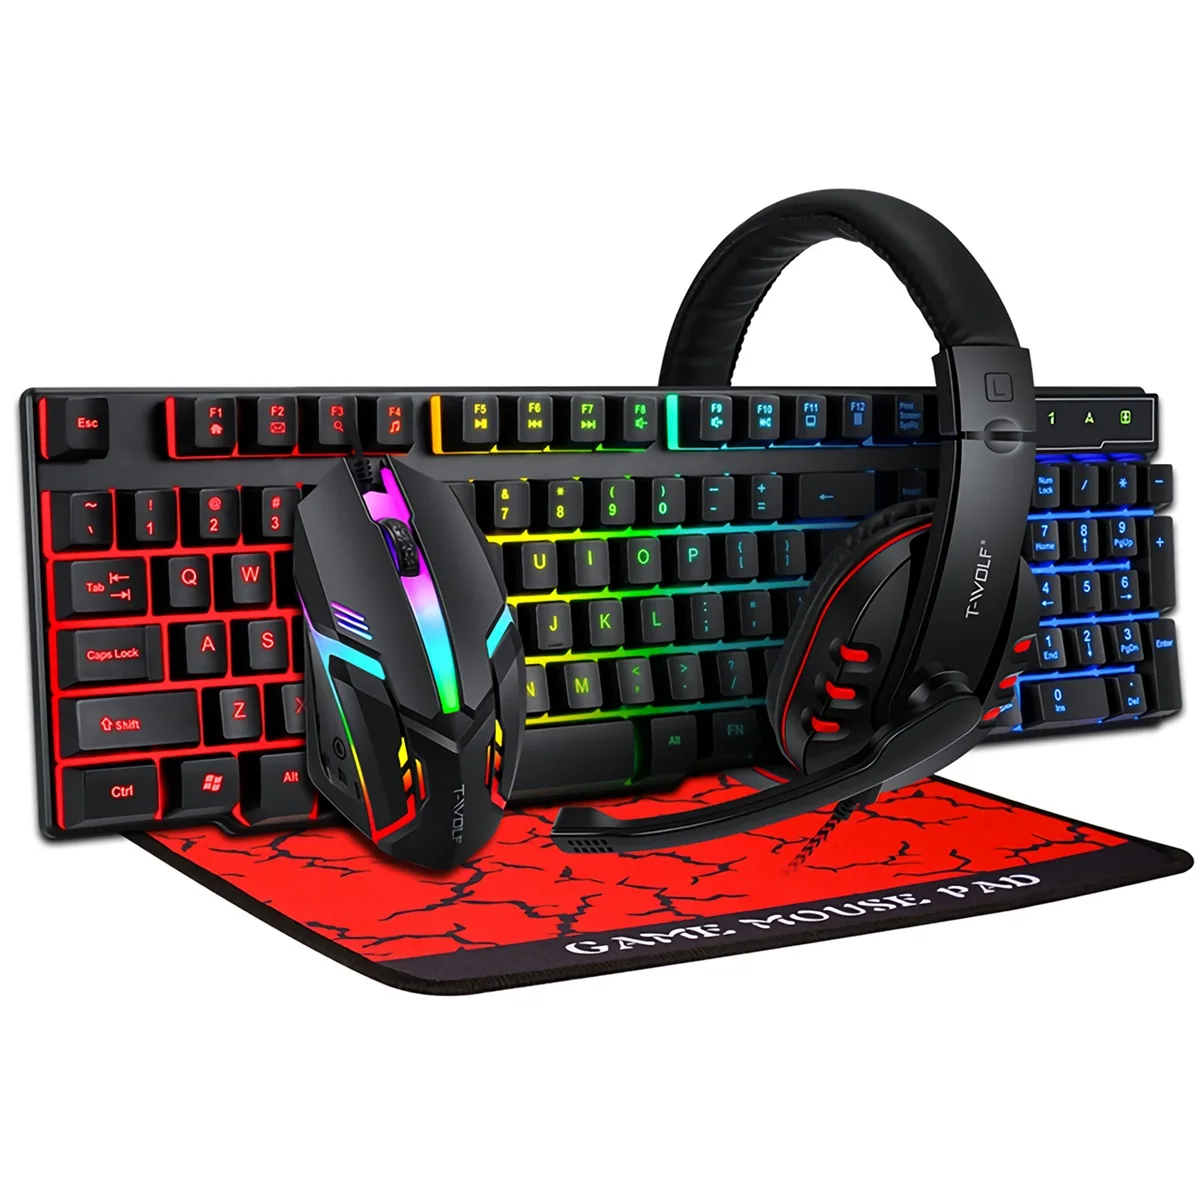 4Pcs Gaming keyboard and Mouse Wired backlight mechanical feeling keyboard headphones Gamer kit Silent Mouse Set for PC Laptop